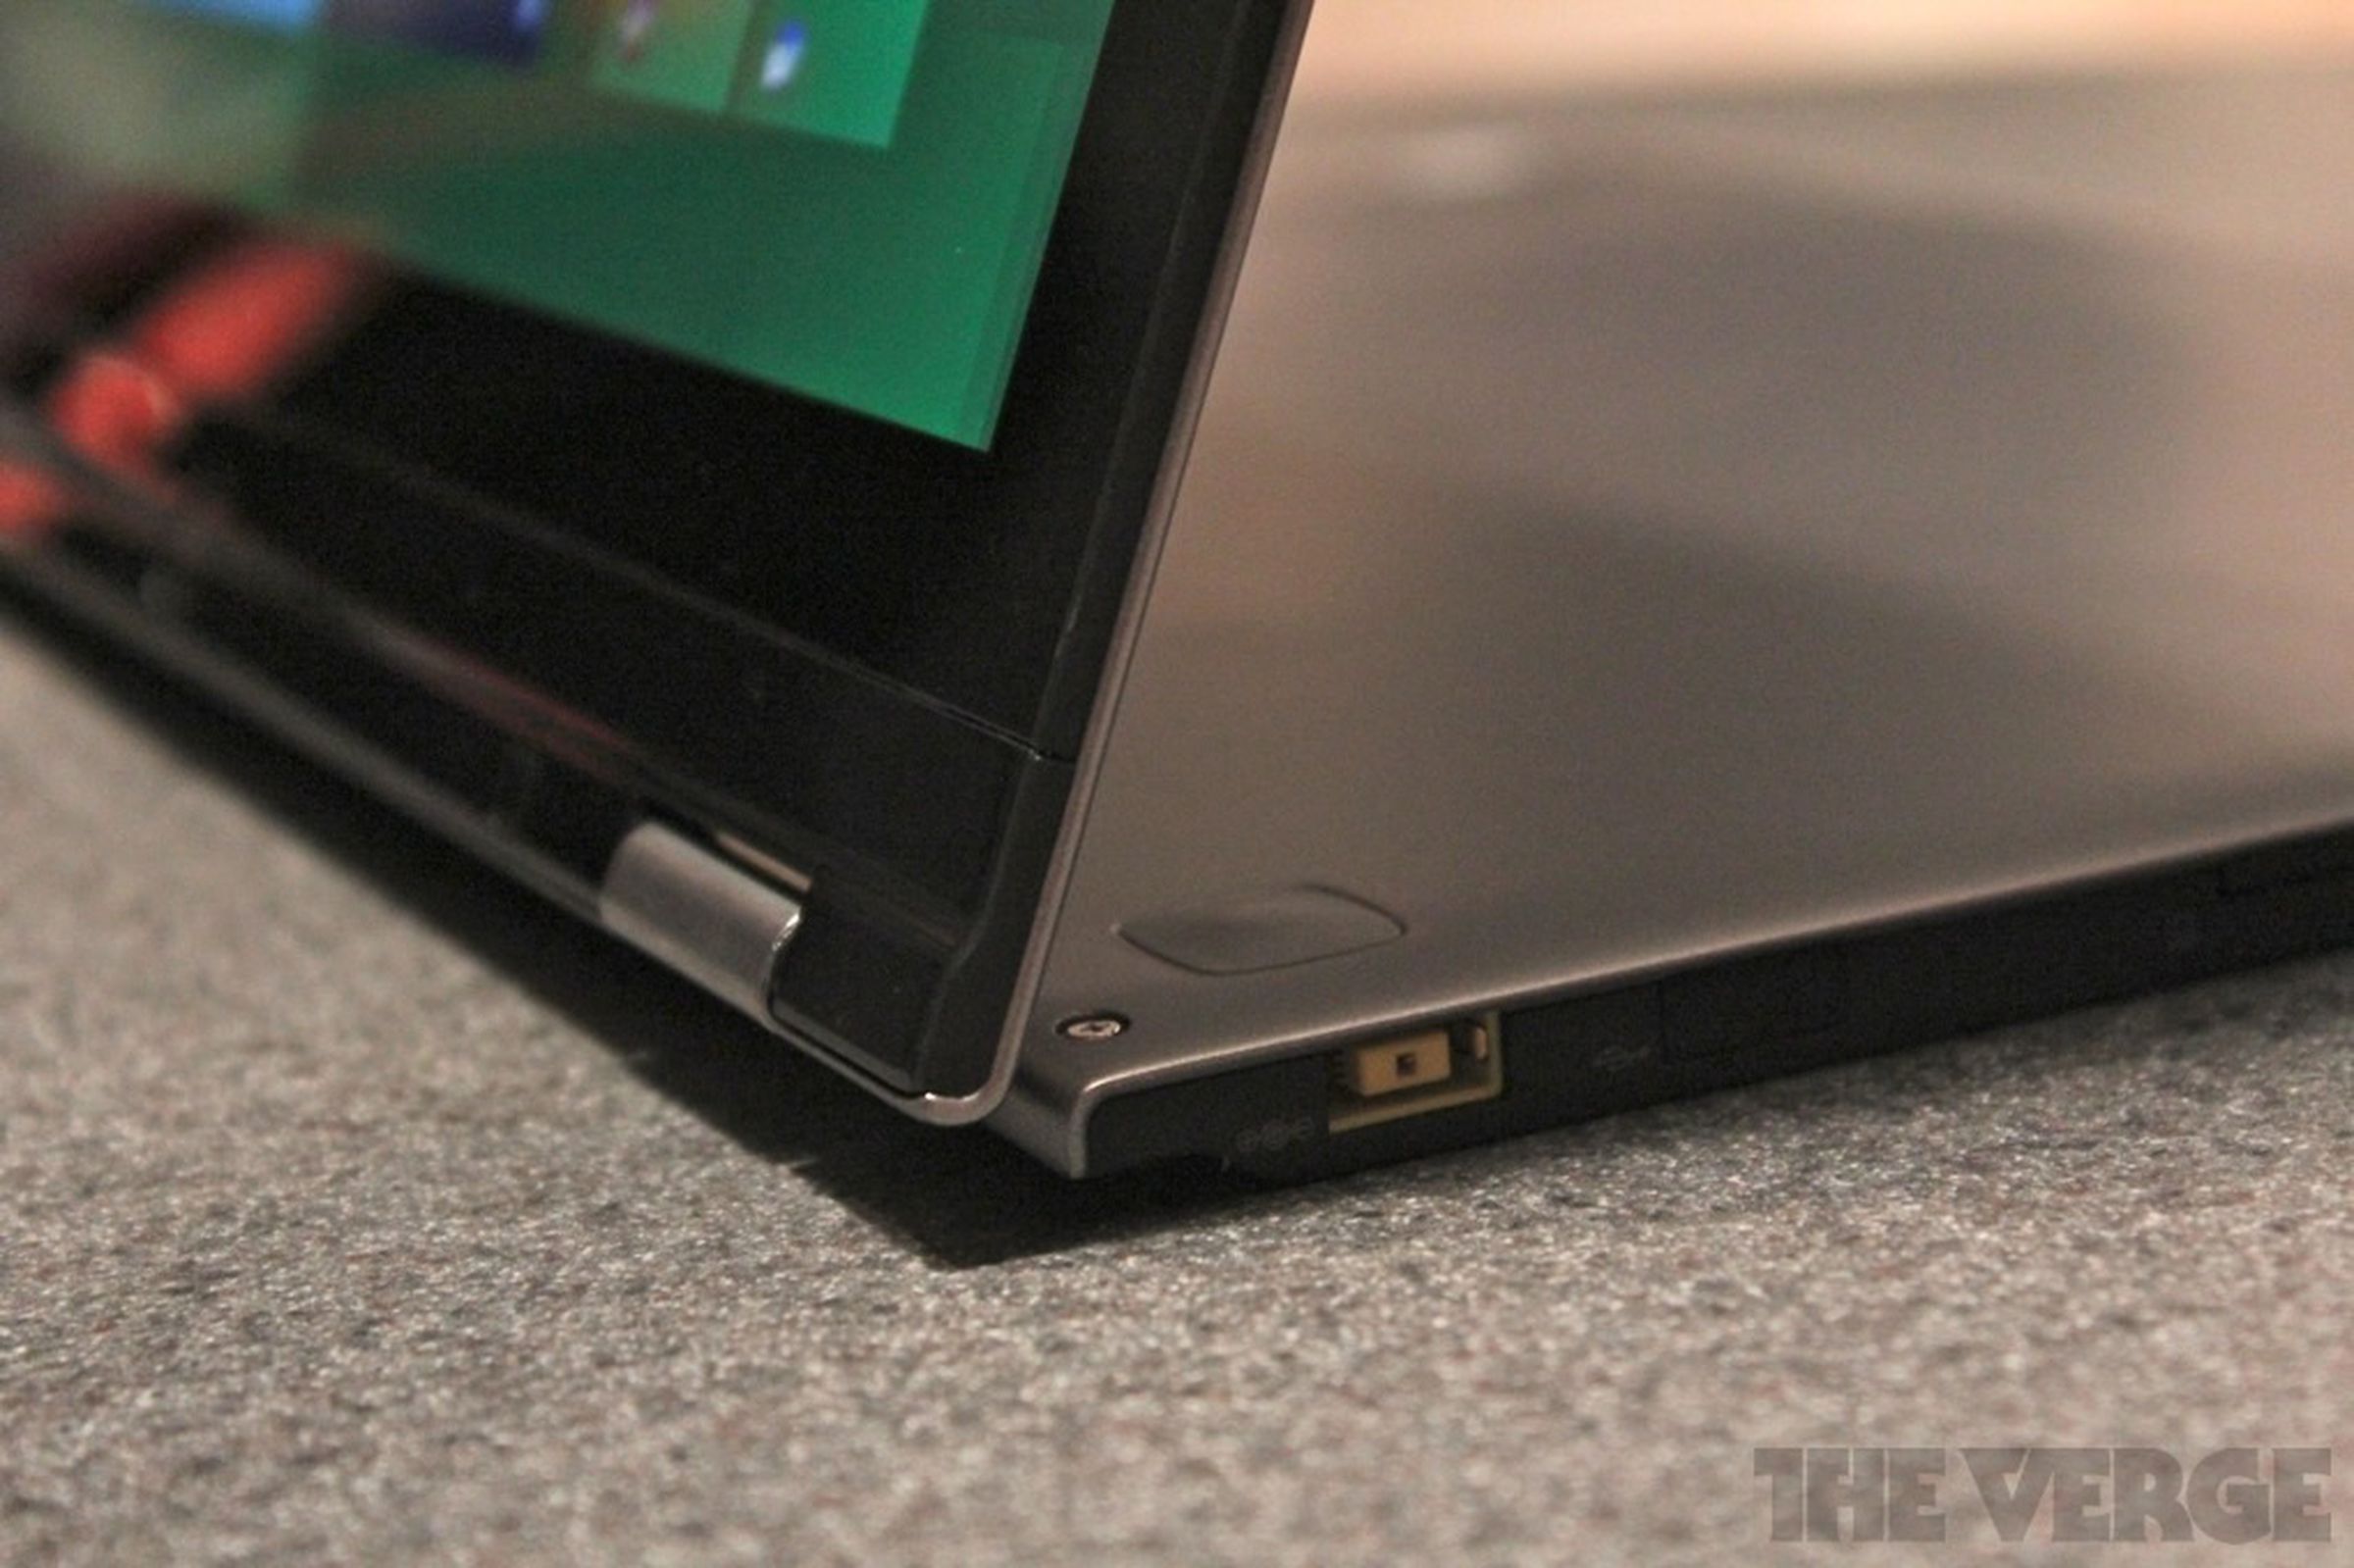 Lenovo IdeaPad Yoga hands-on pictures